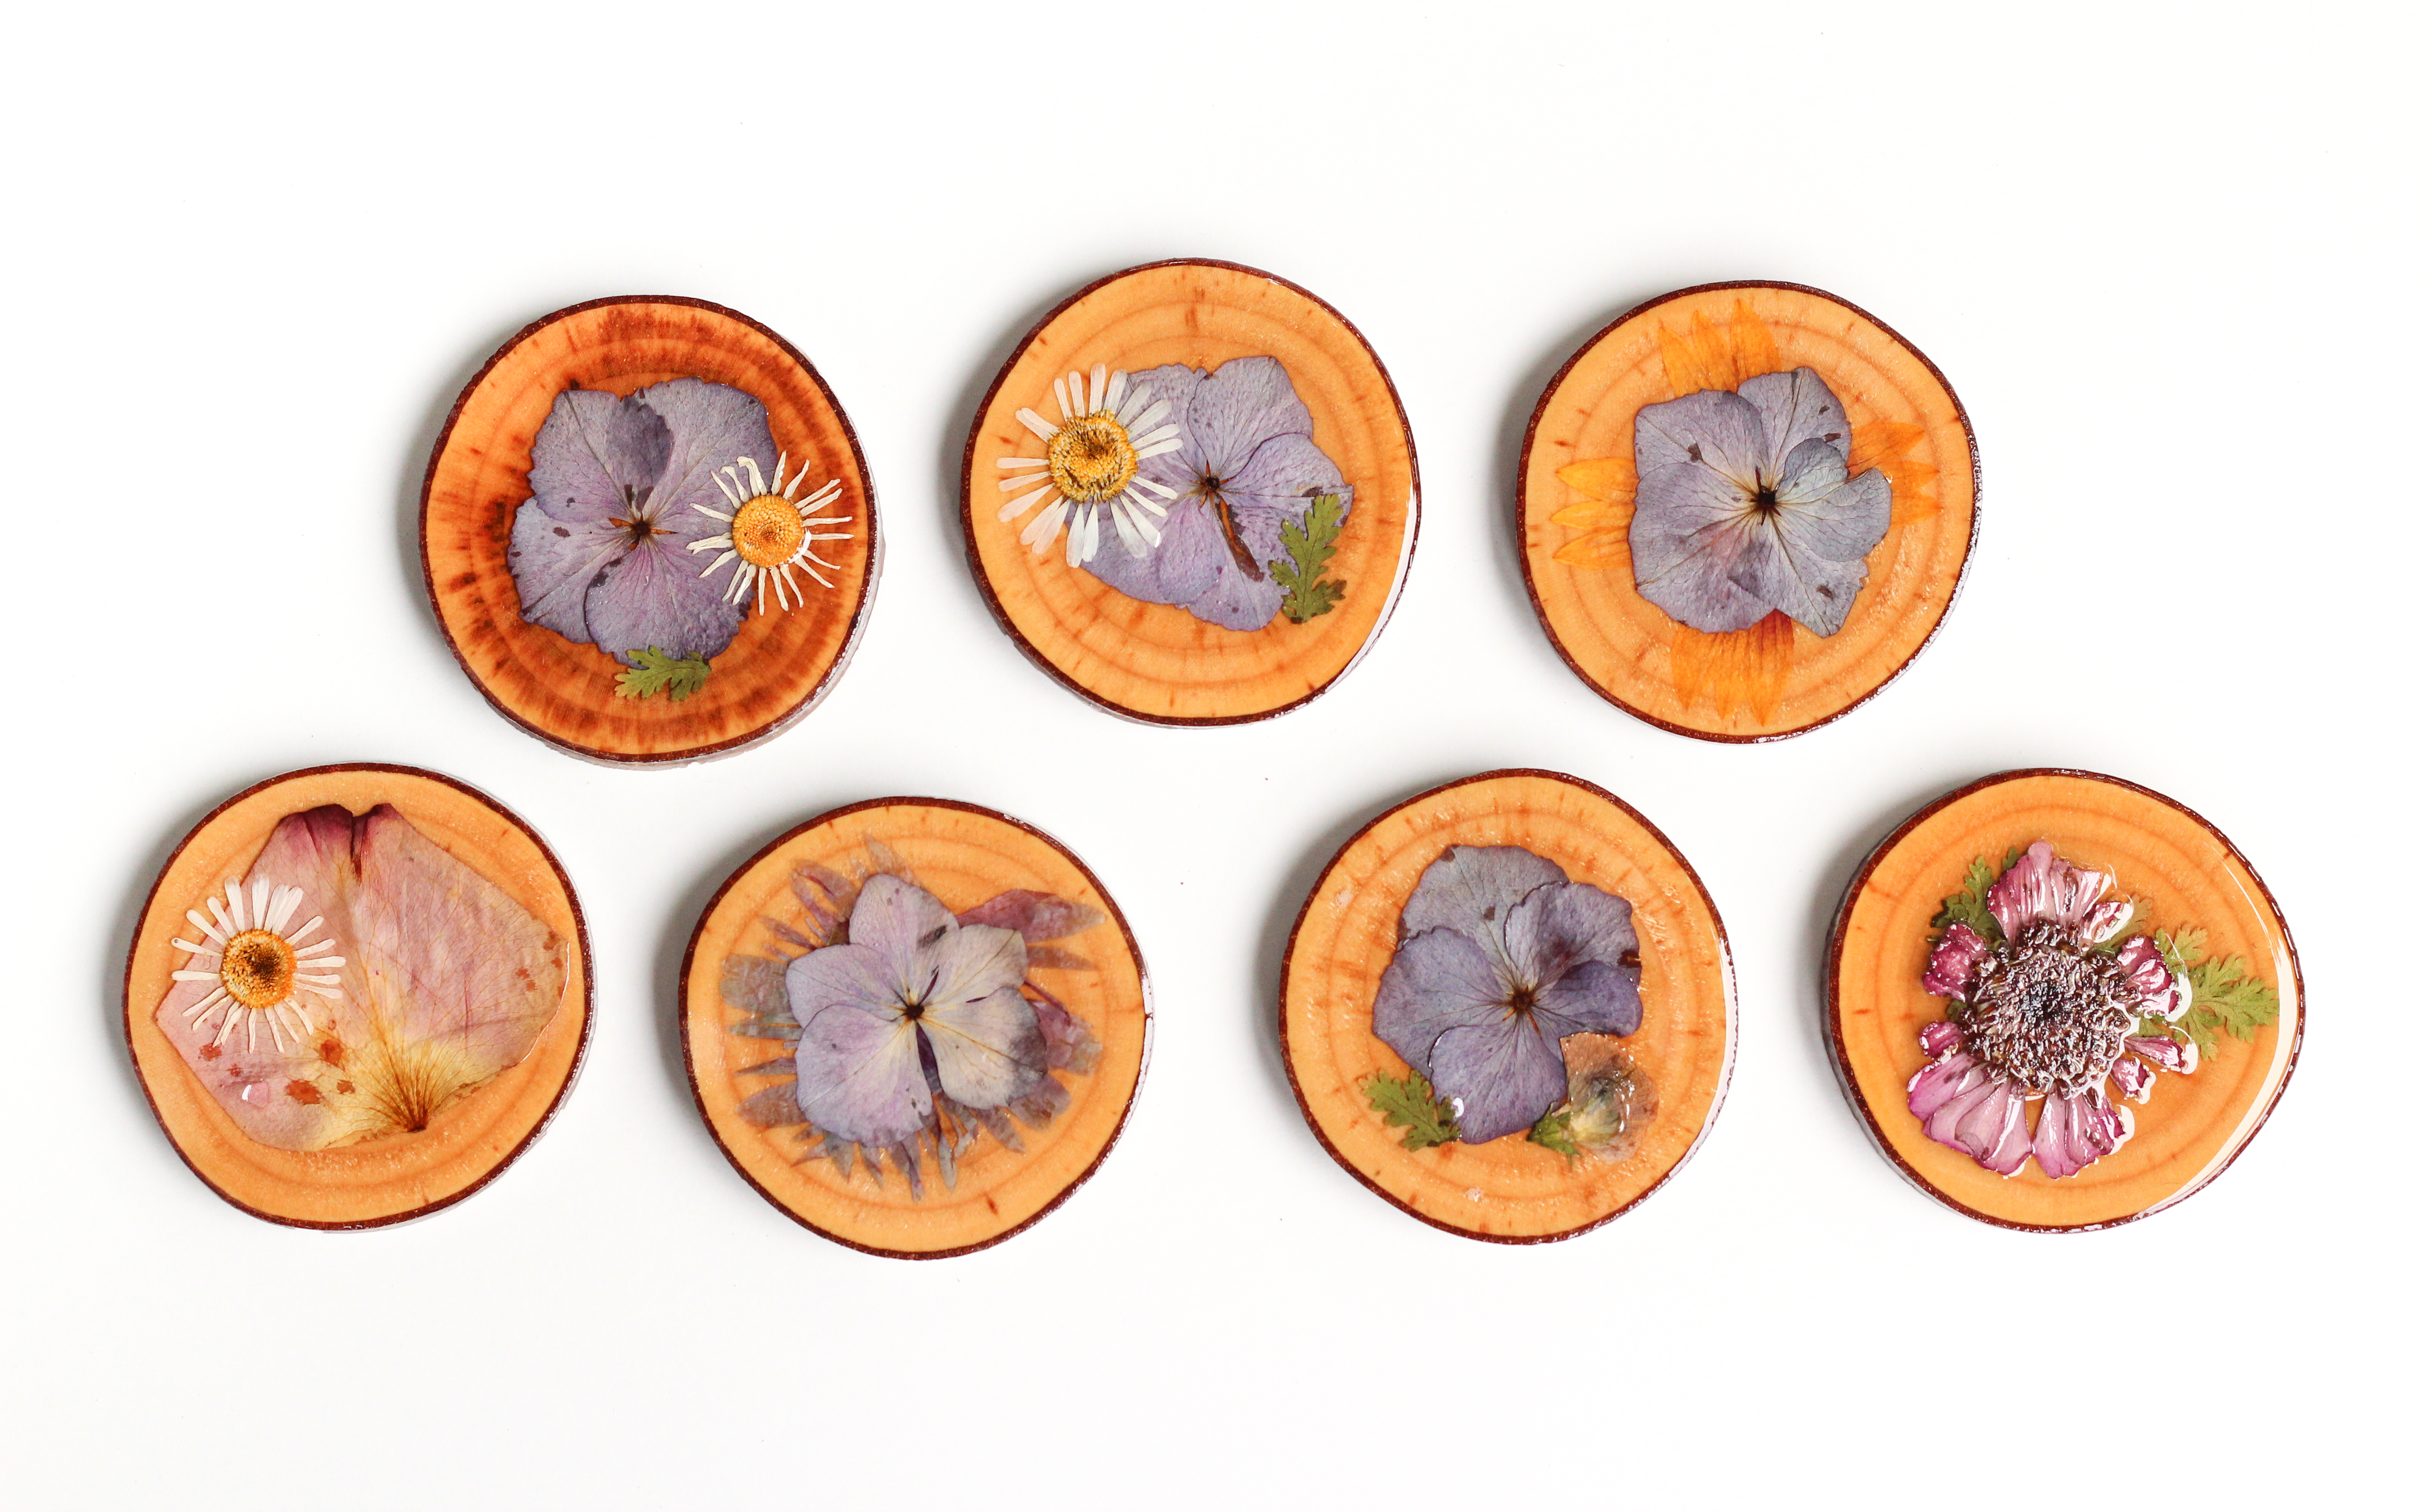 20 pcs Multiple Dried Flowers DIY Real Pressed Handmade Dried Flowers for Craft